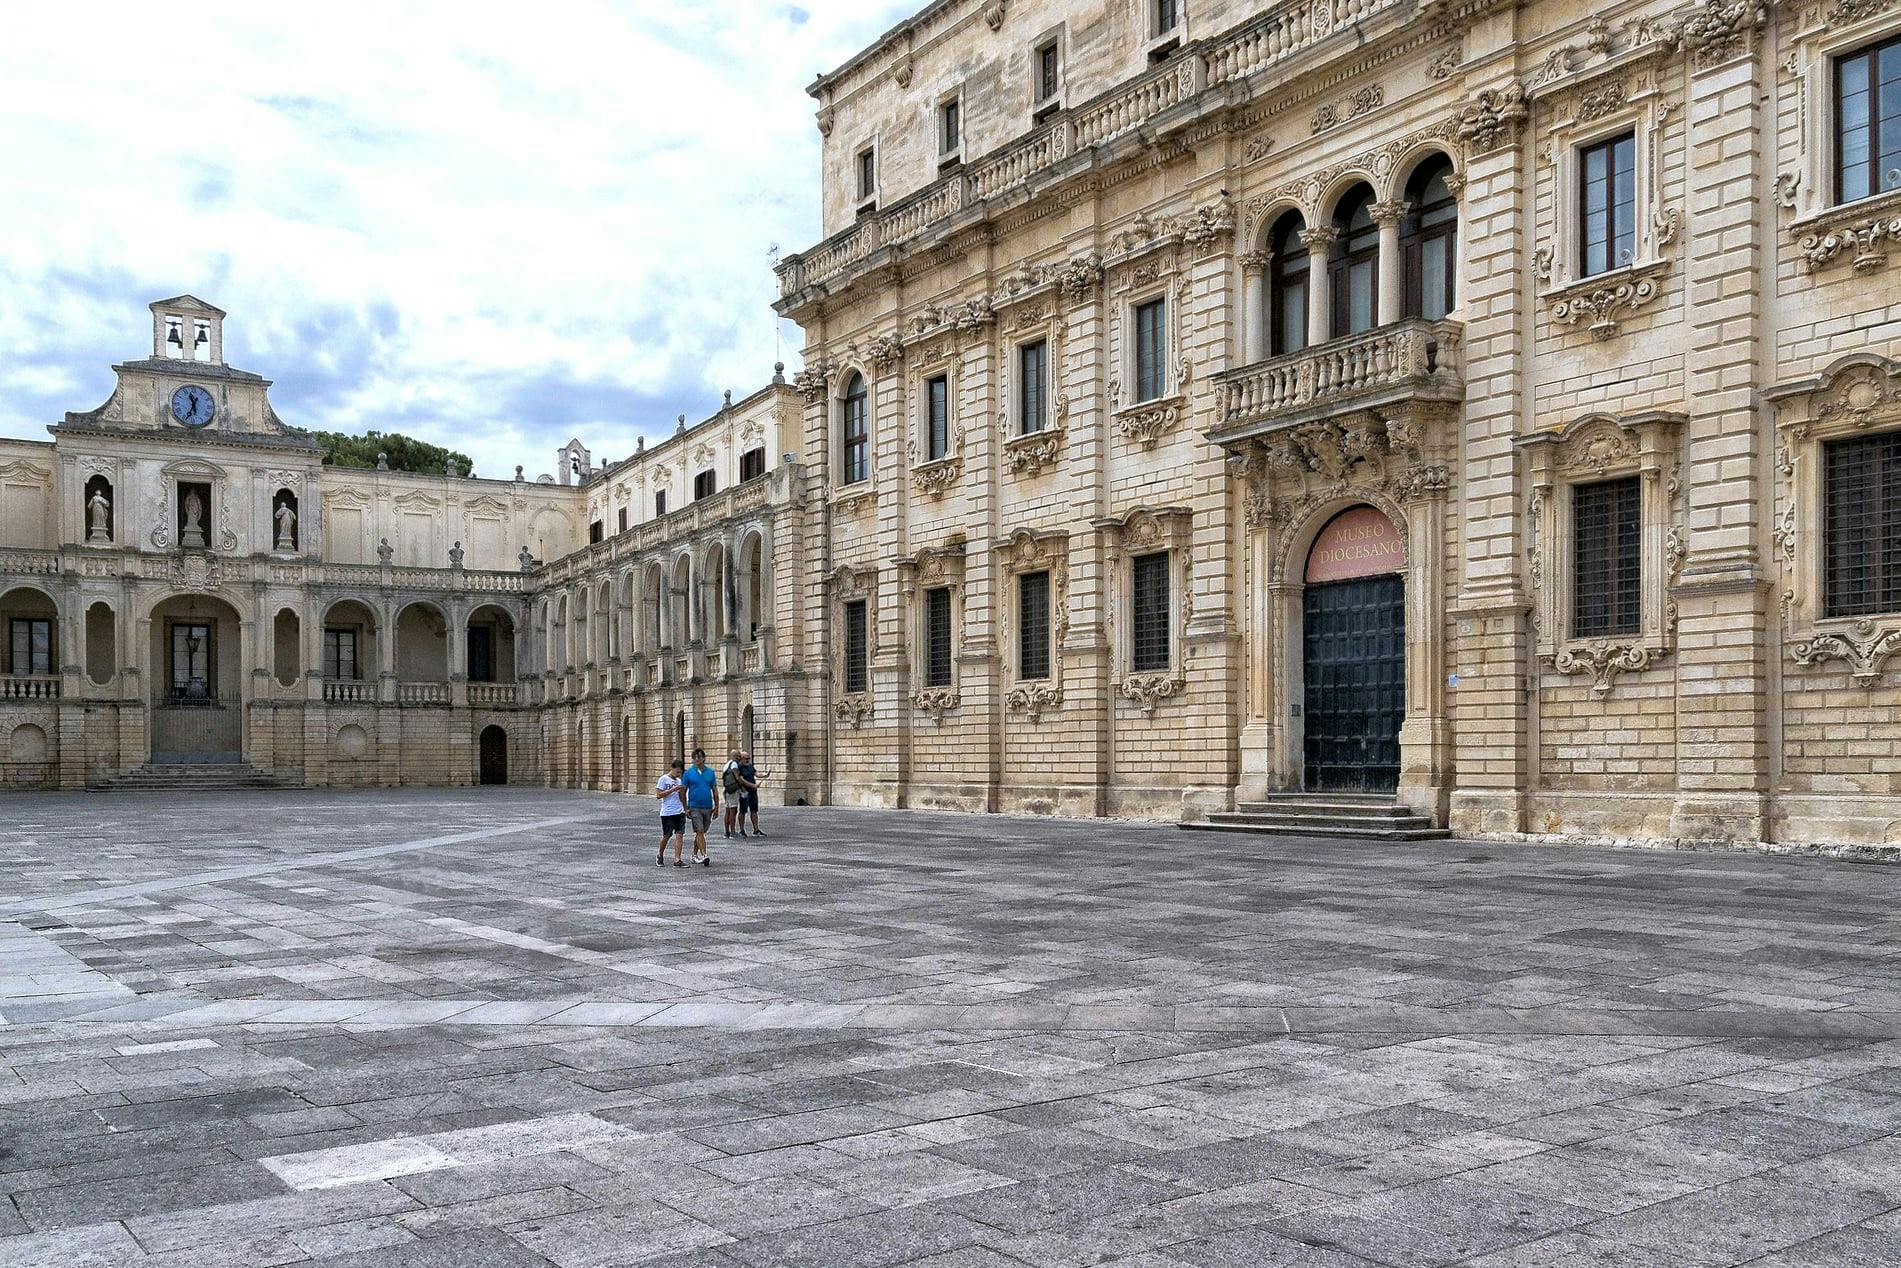 Lecce Half-day Visit from Salento Ionian Coast